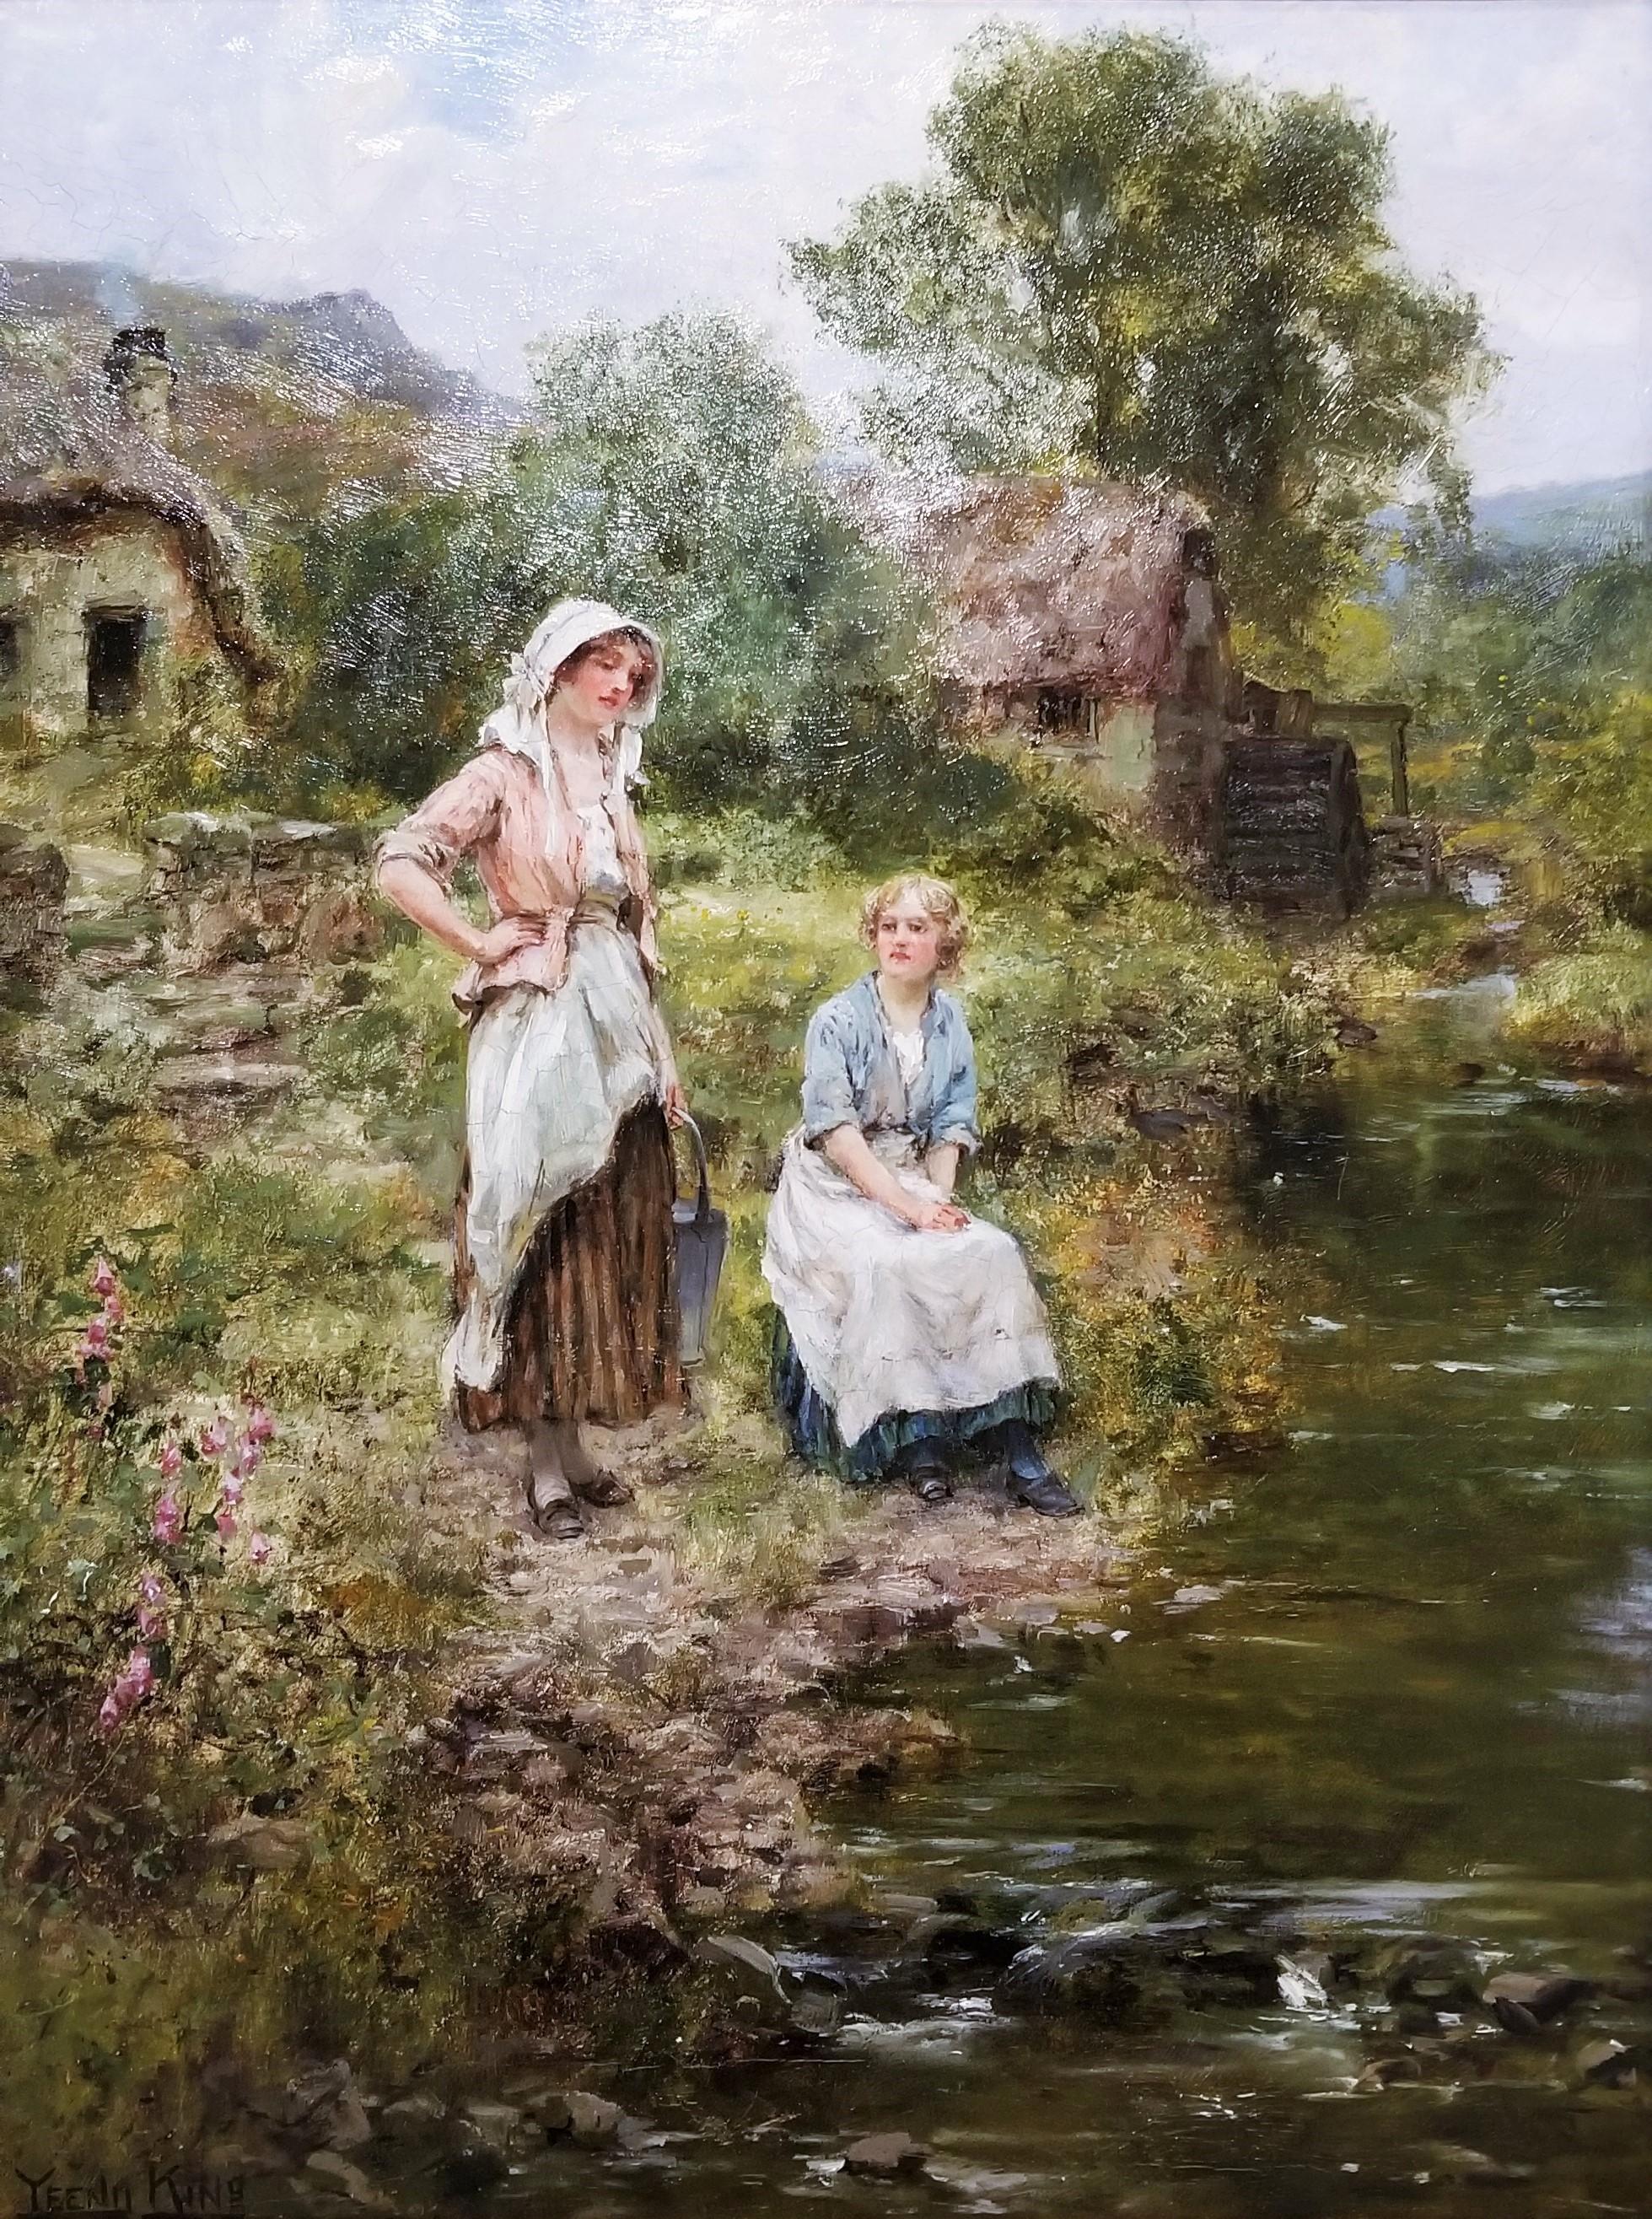 Figurative Painting Henry John Yeend King - Fetching Water by the River /// Impressionnisme britannique Yeend King peinture à l'huile 